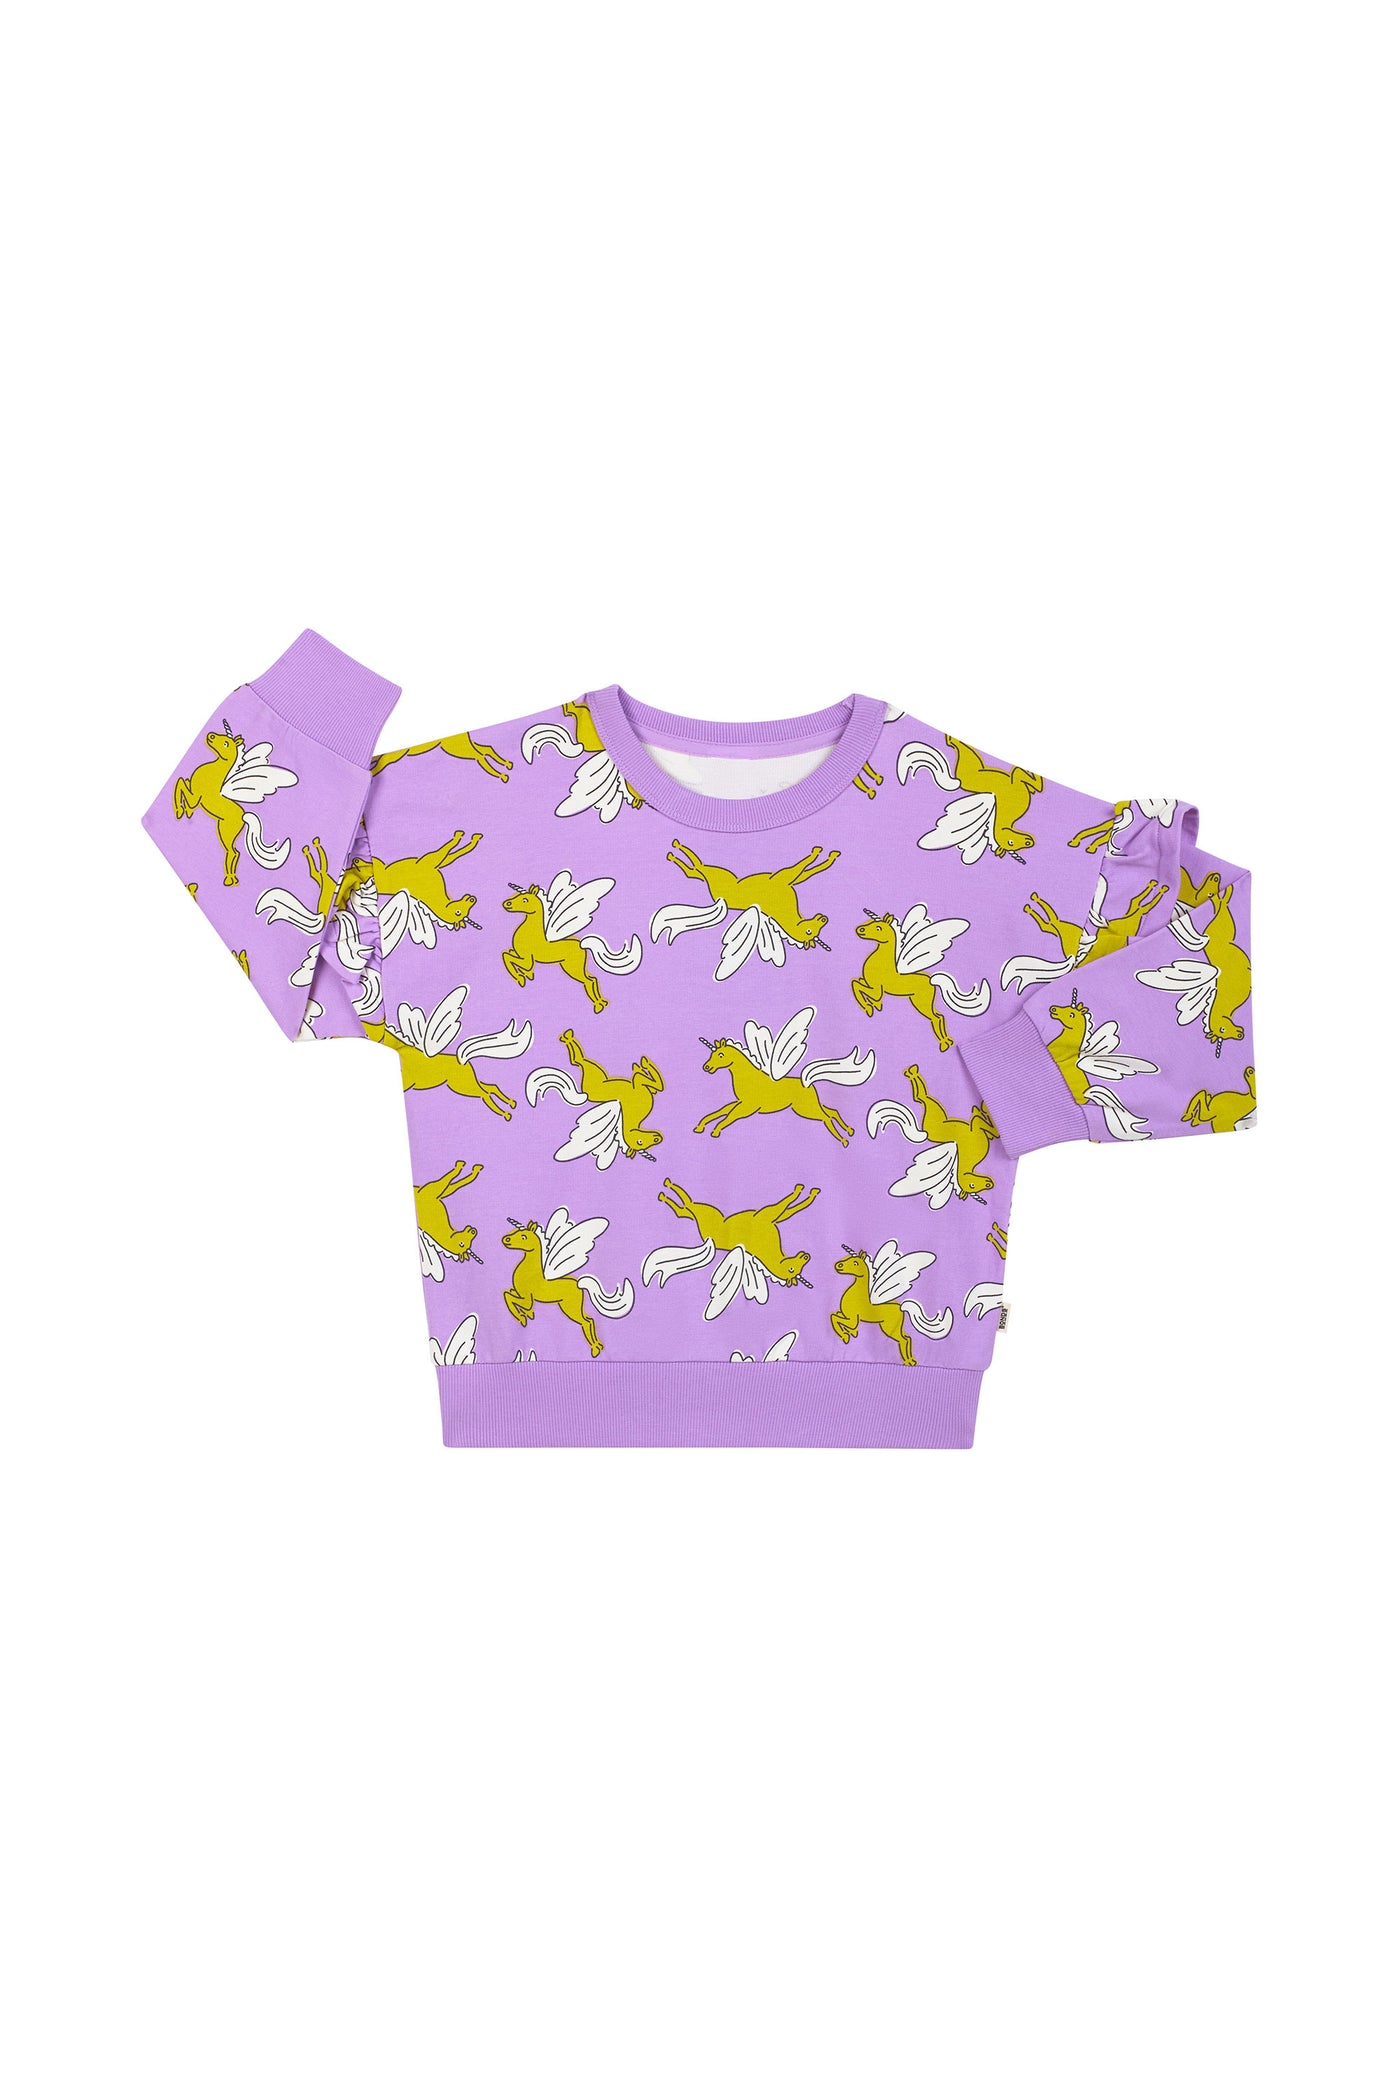 Bonds Kids Soft Threads Frill Pullover - Mythical Magic Lilac